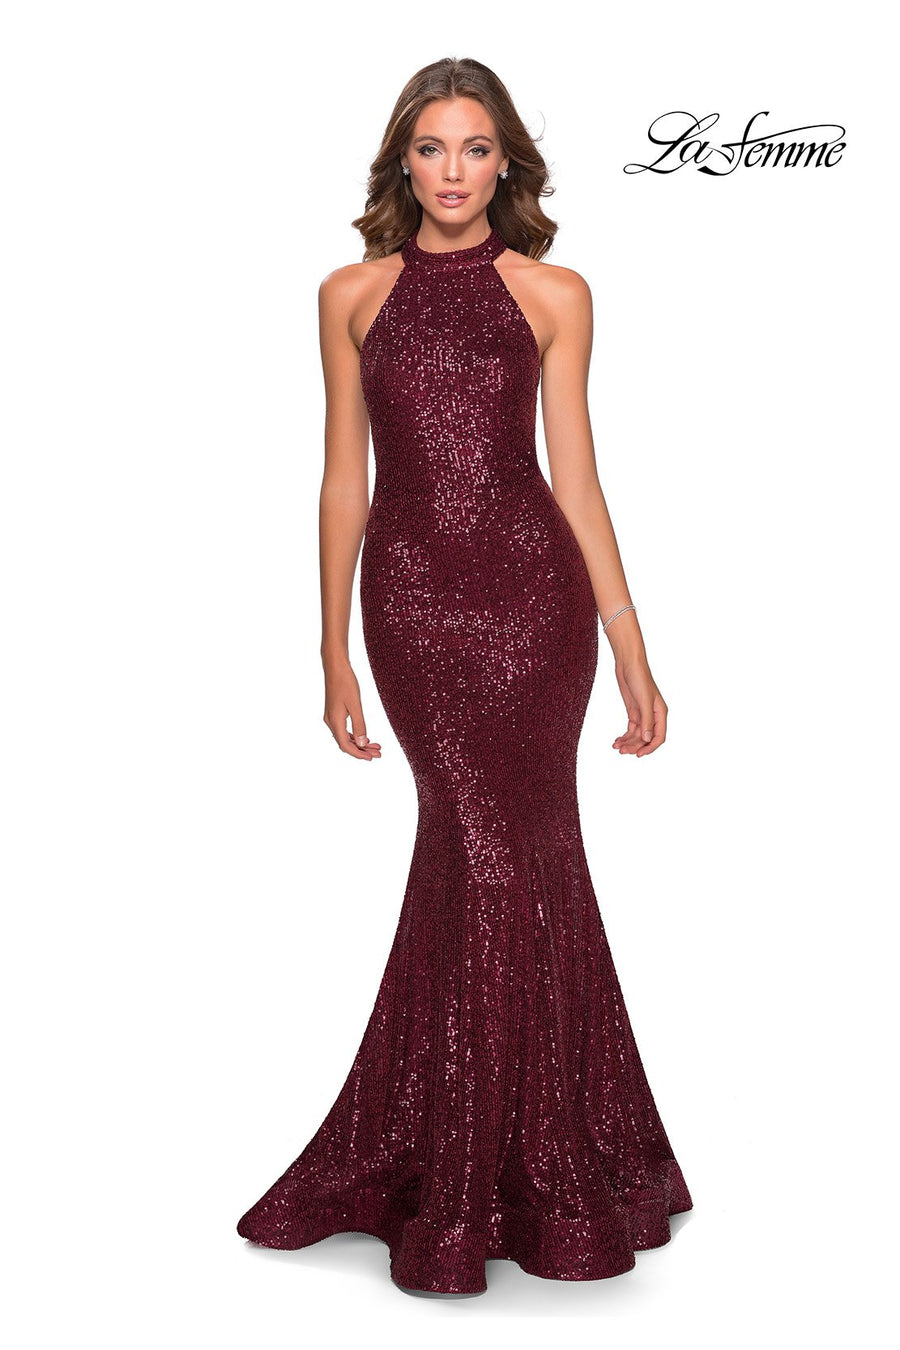 La Femme 28612 prom dress images.  La Femme 28612 is available in these colors: Burgundy, Champagne, Emerald, Mint, Navy.